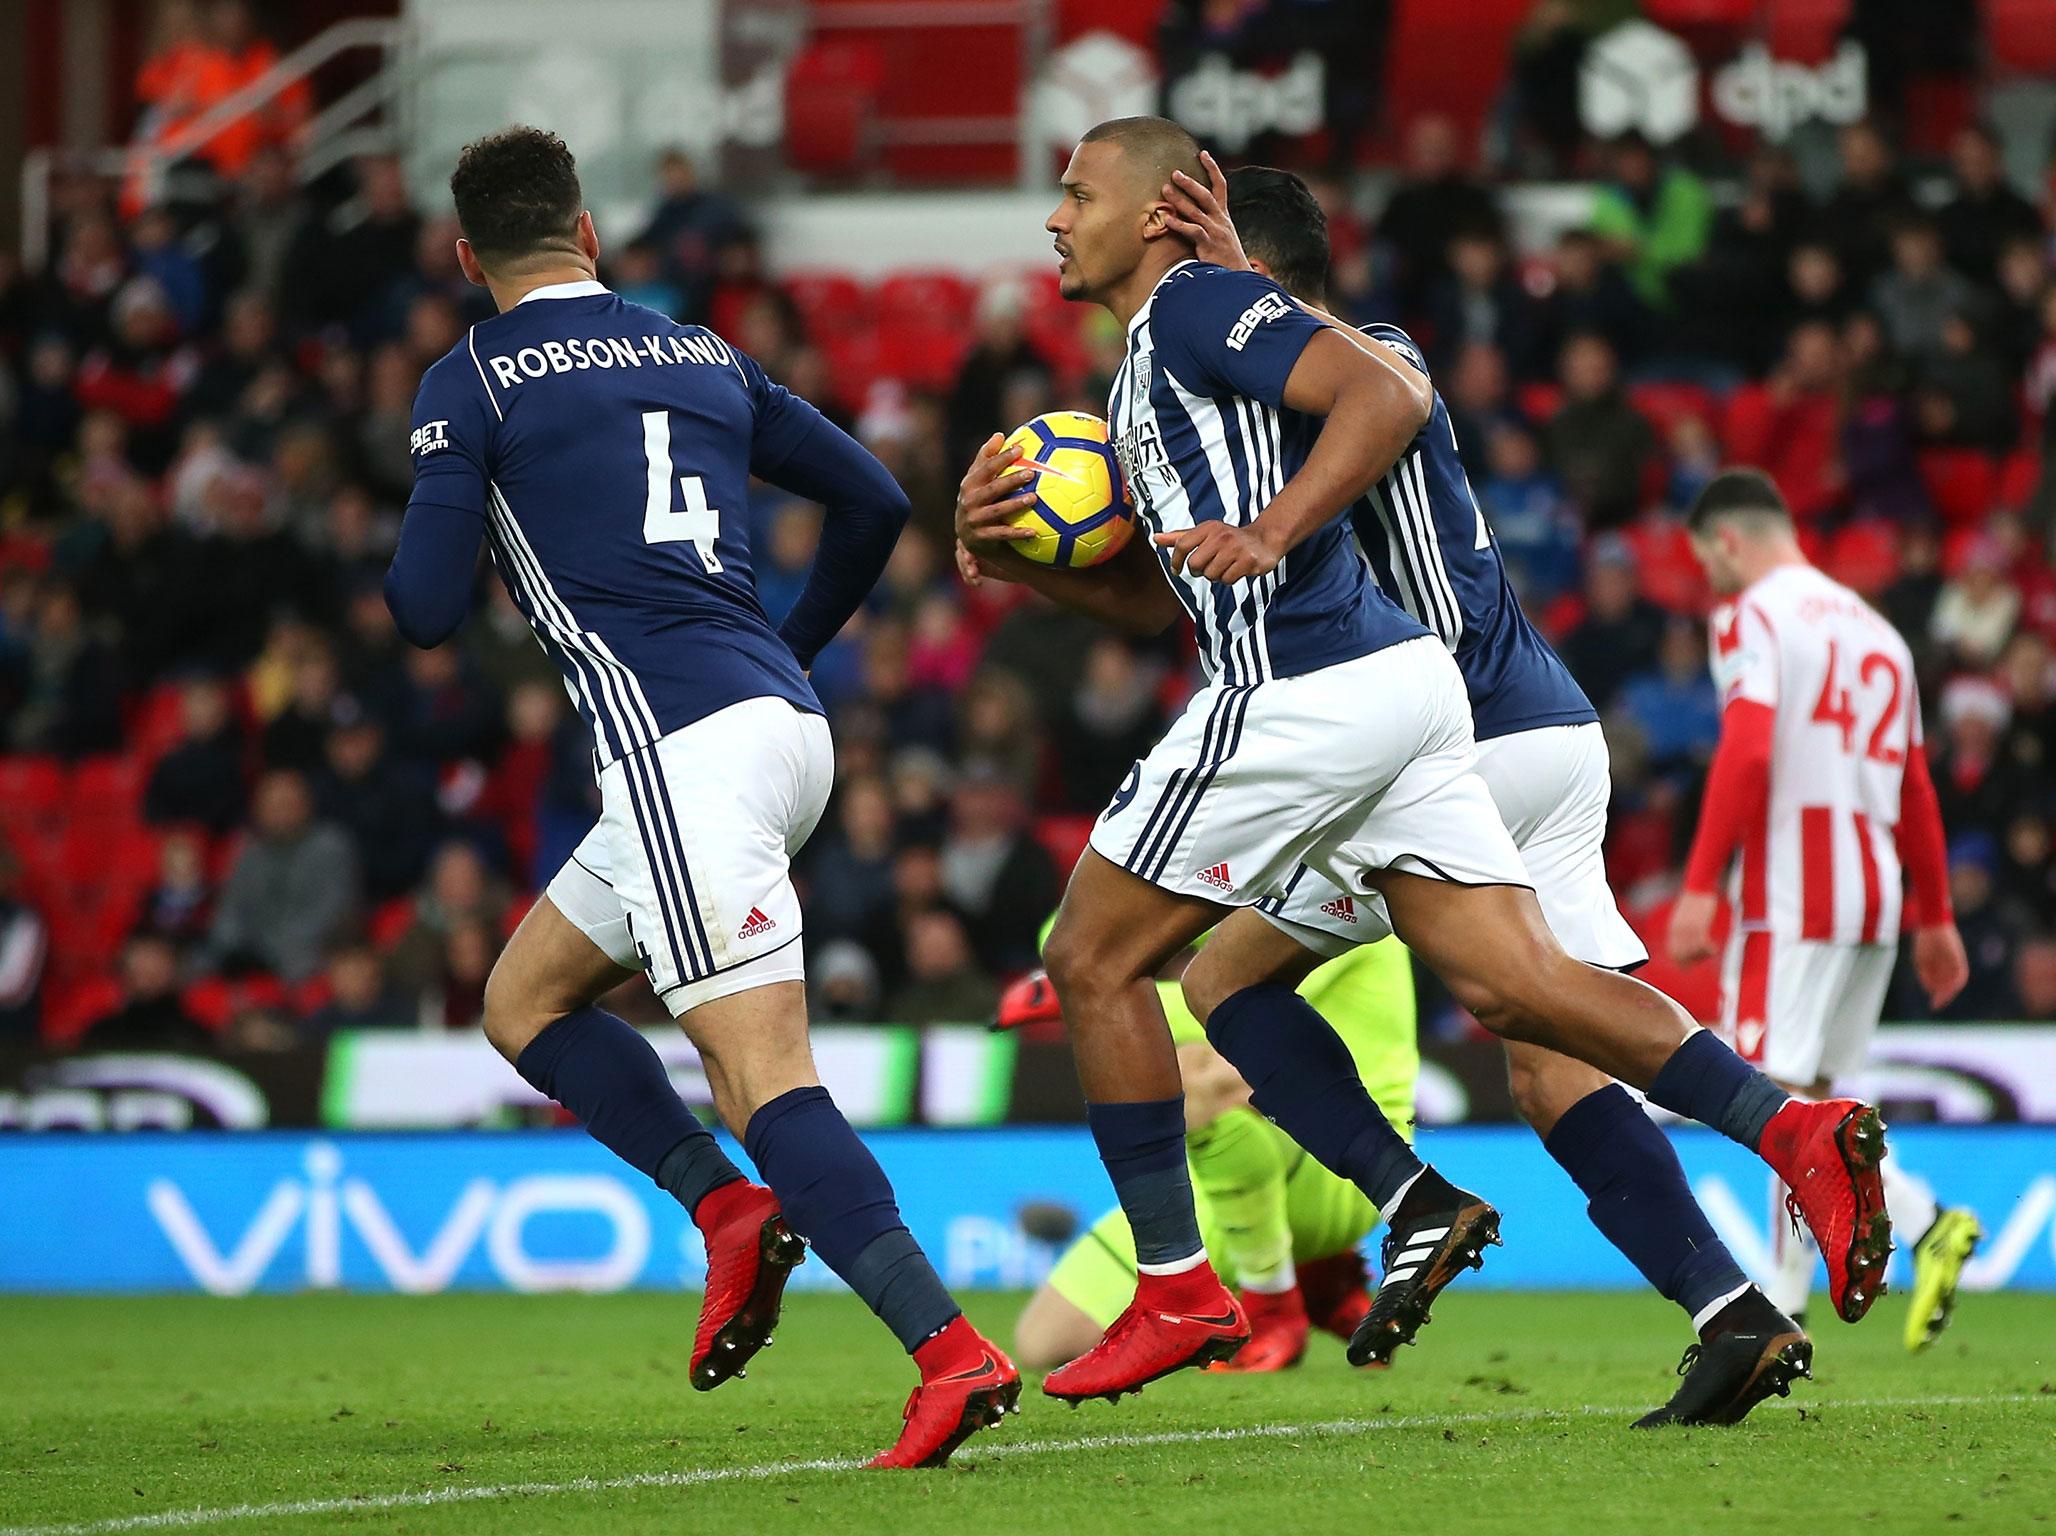 Rondon gave the Baggies hope but to no avail